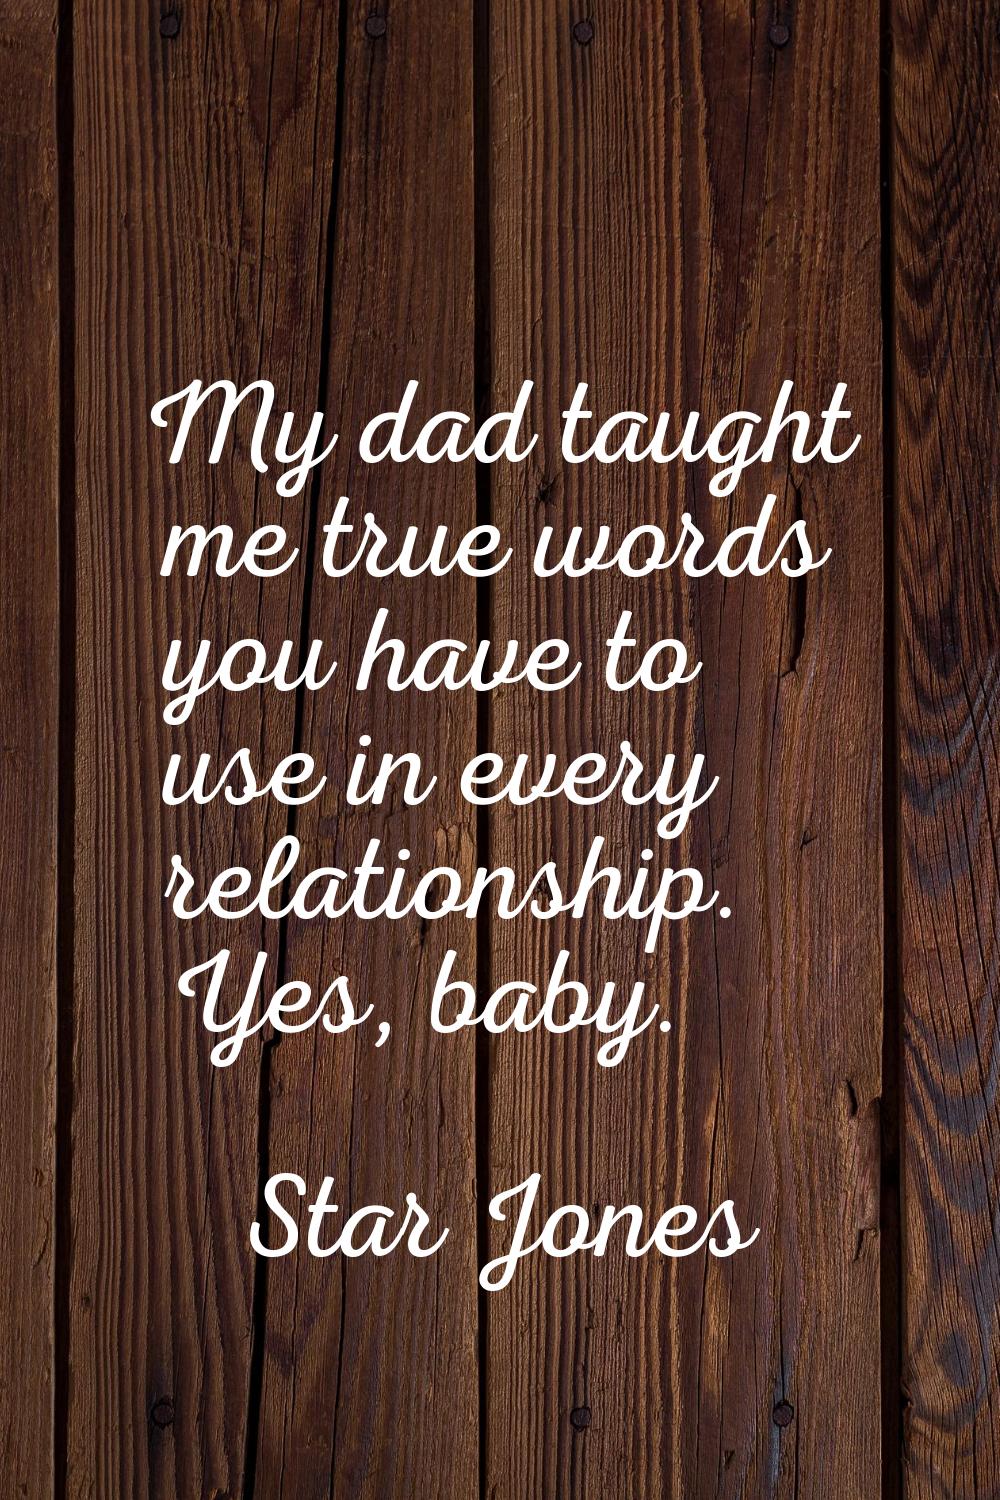 My dad taught me true words you have to use in every relationship. Yes, baby.